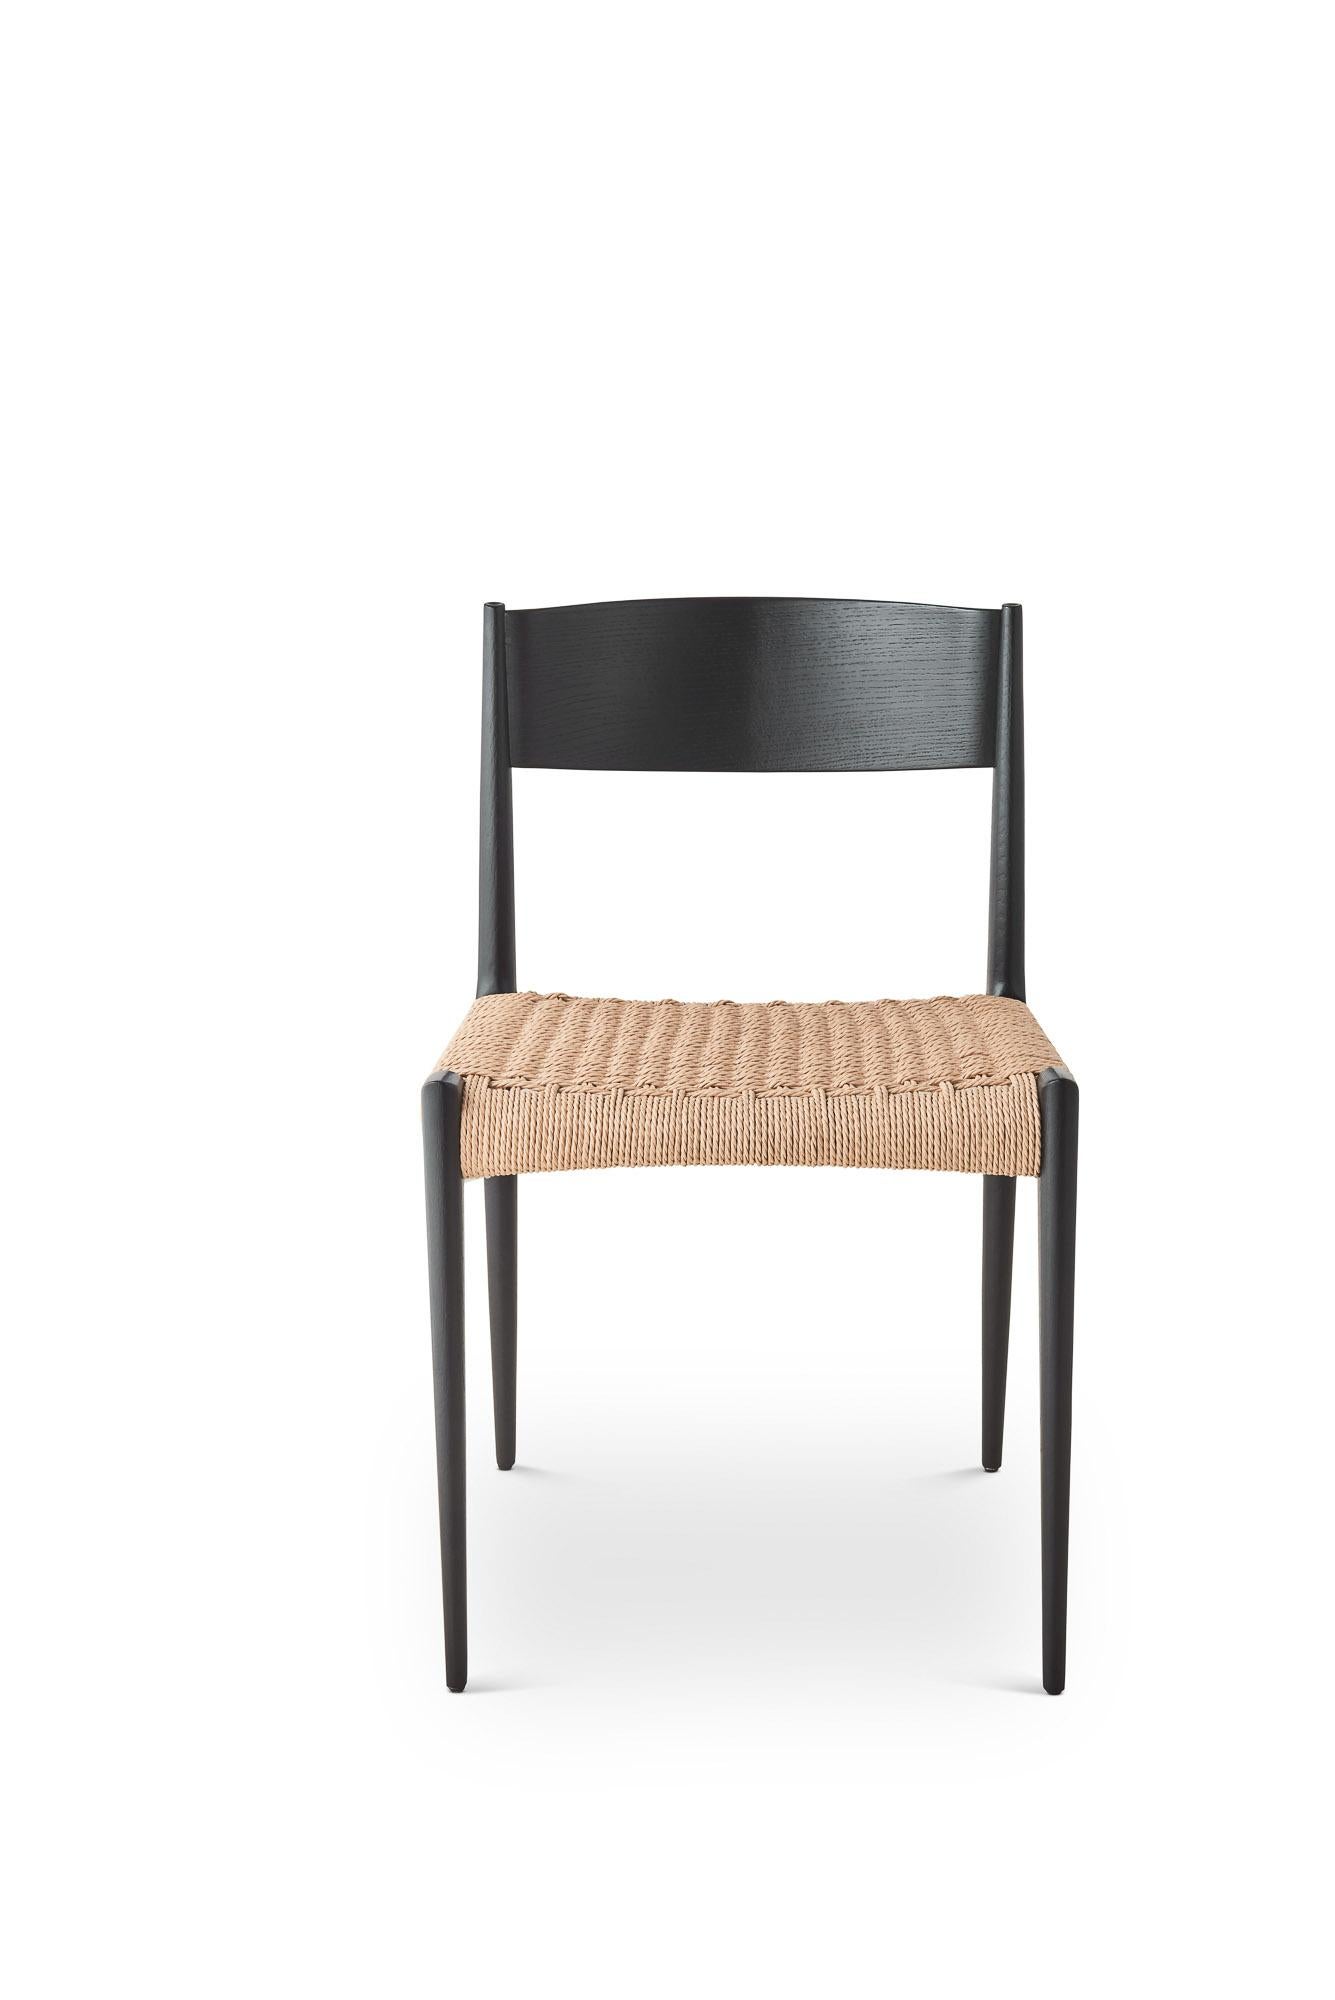 PIA Chair
Solid oak frame, paper cordel seat
Dimensions: H75 x 49 x 48 cm (seat height 45cm)

Wood:
– Oak
– Smoked oak
– Black lacquered oak
– Walnut

Paper cordel:
– Natural
– Black

--
The Pia chair signed by DK3 was imagined and designed by the